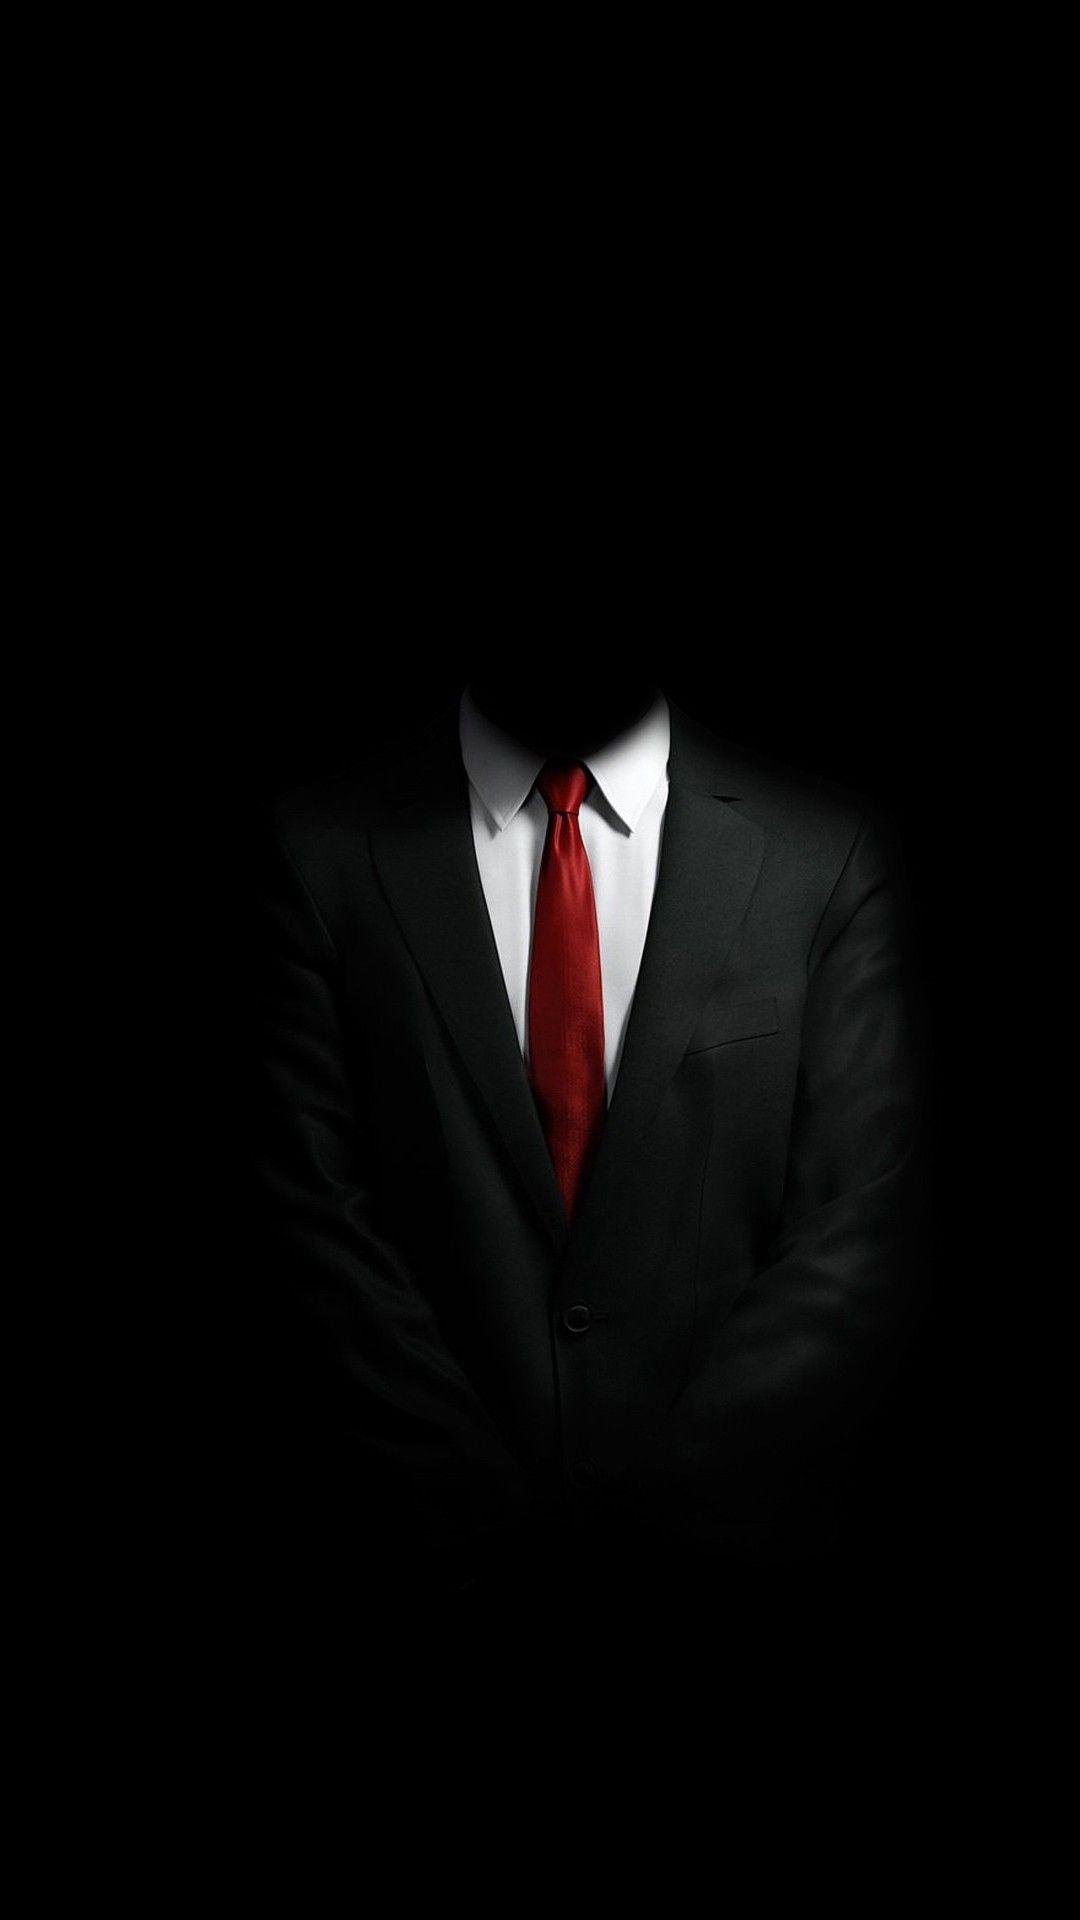 Mysterious Man Wallpapers - Top Free Mysterious Man Backgrounds ...